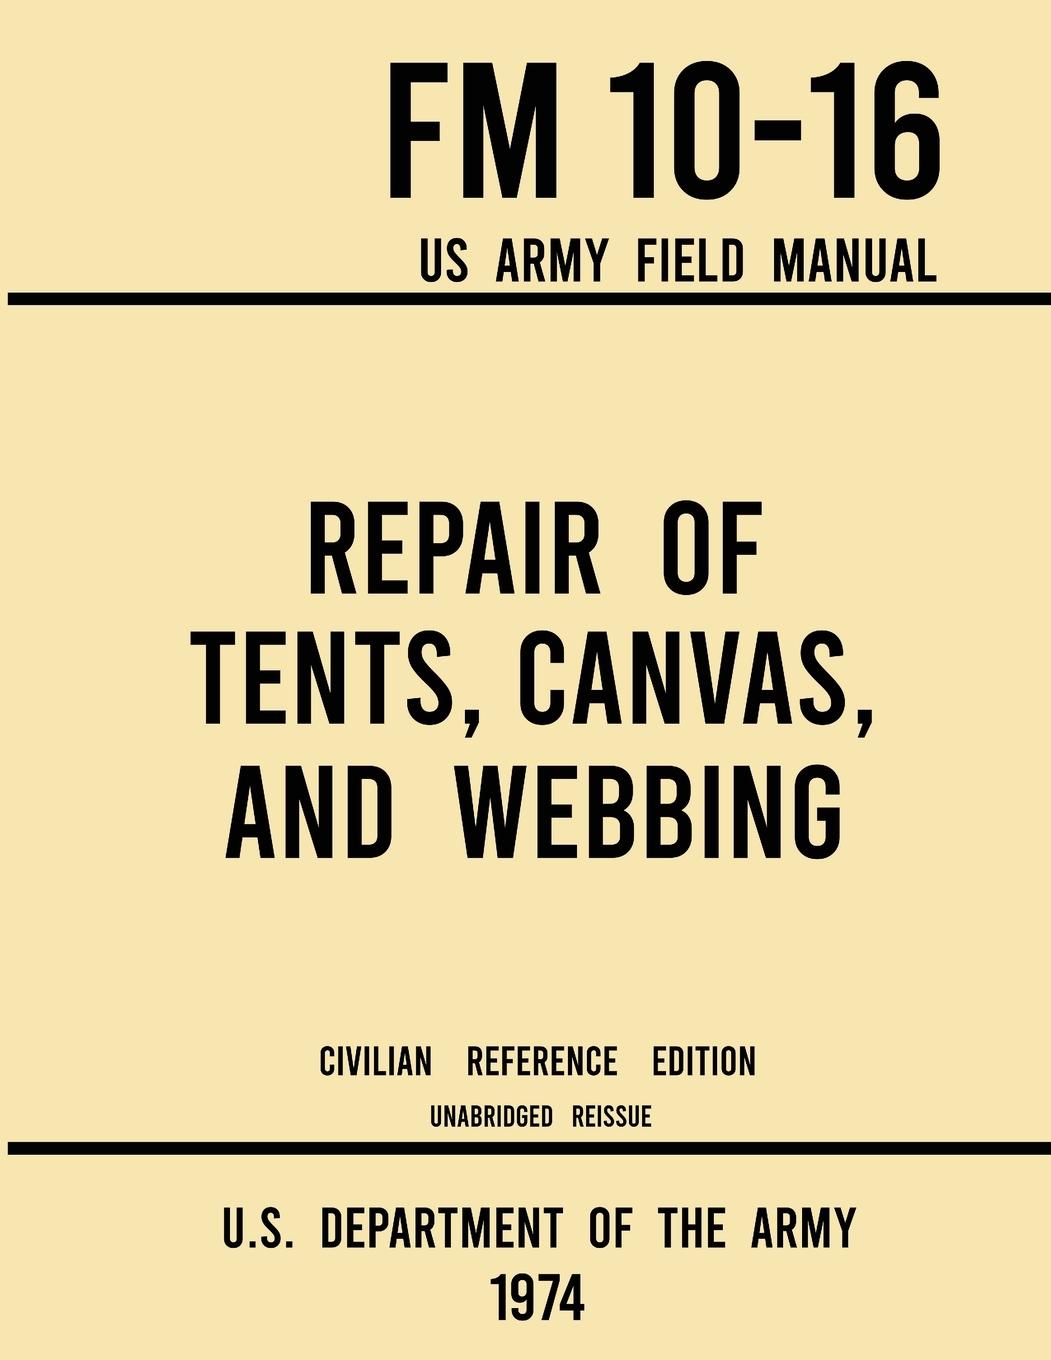 Carte Repair of Tents, Canvas, and Webbing - FM 10-16 US Army Field Manual (1974 Civilian Reference Edition) 